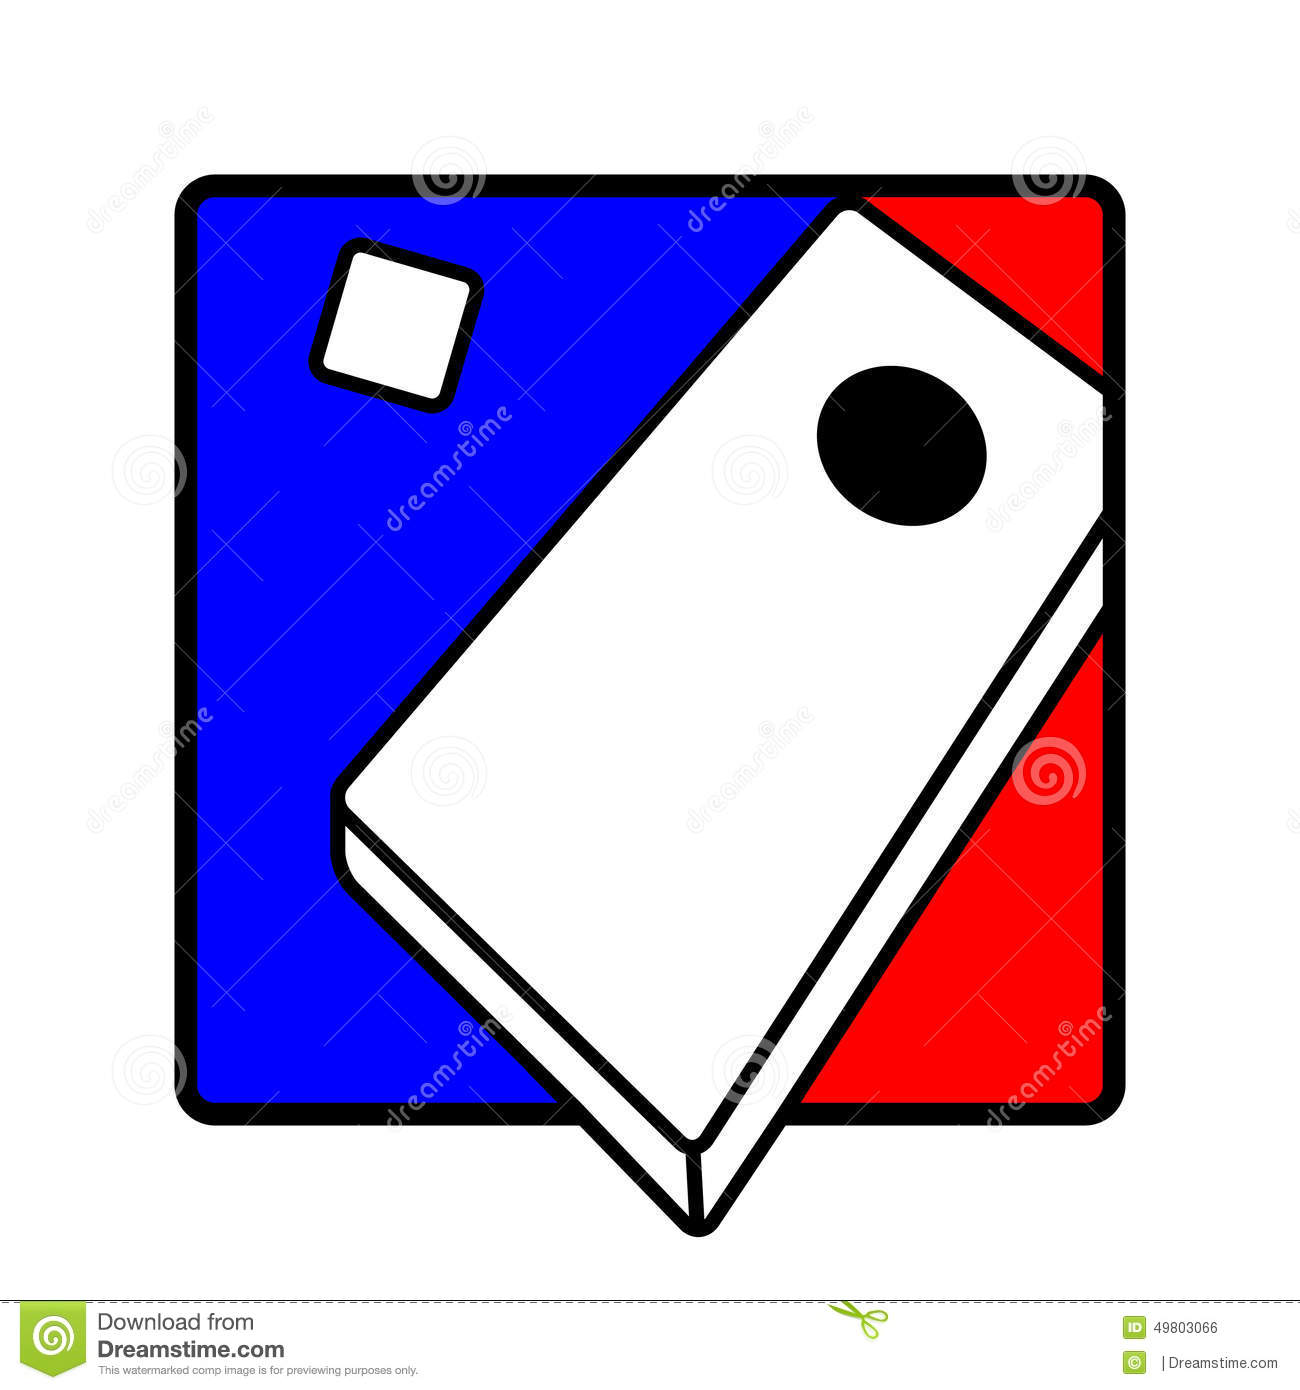 Icon Graphic Of A Corn Hole Game Showing The Board And Bag